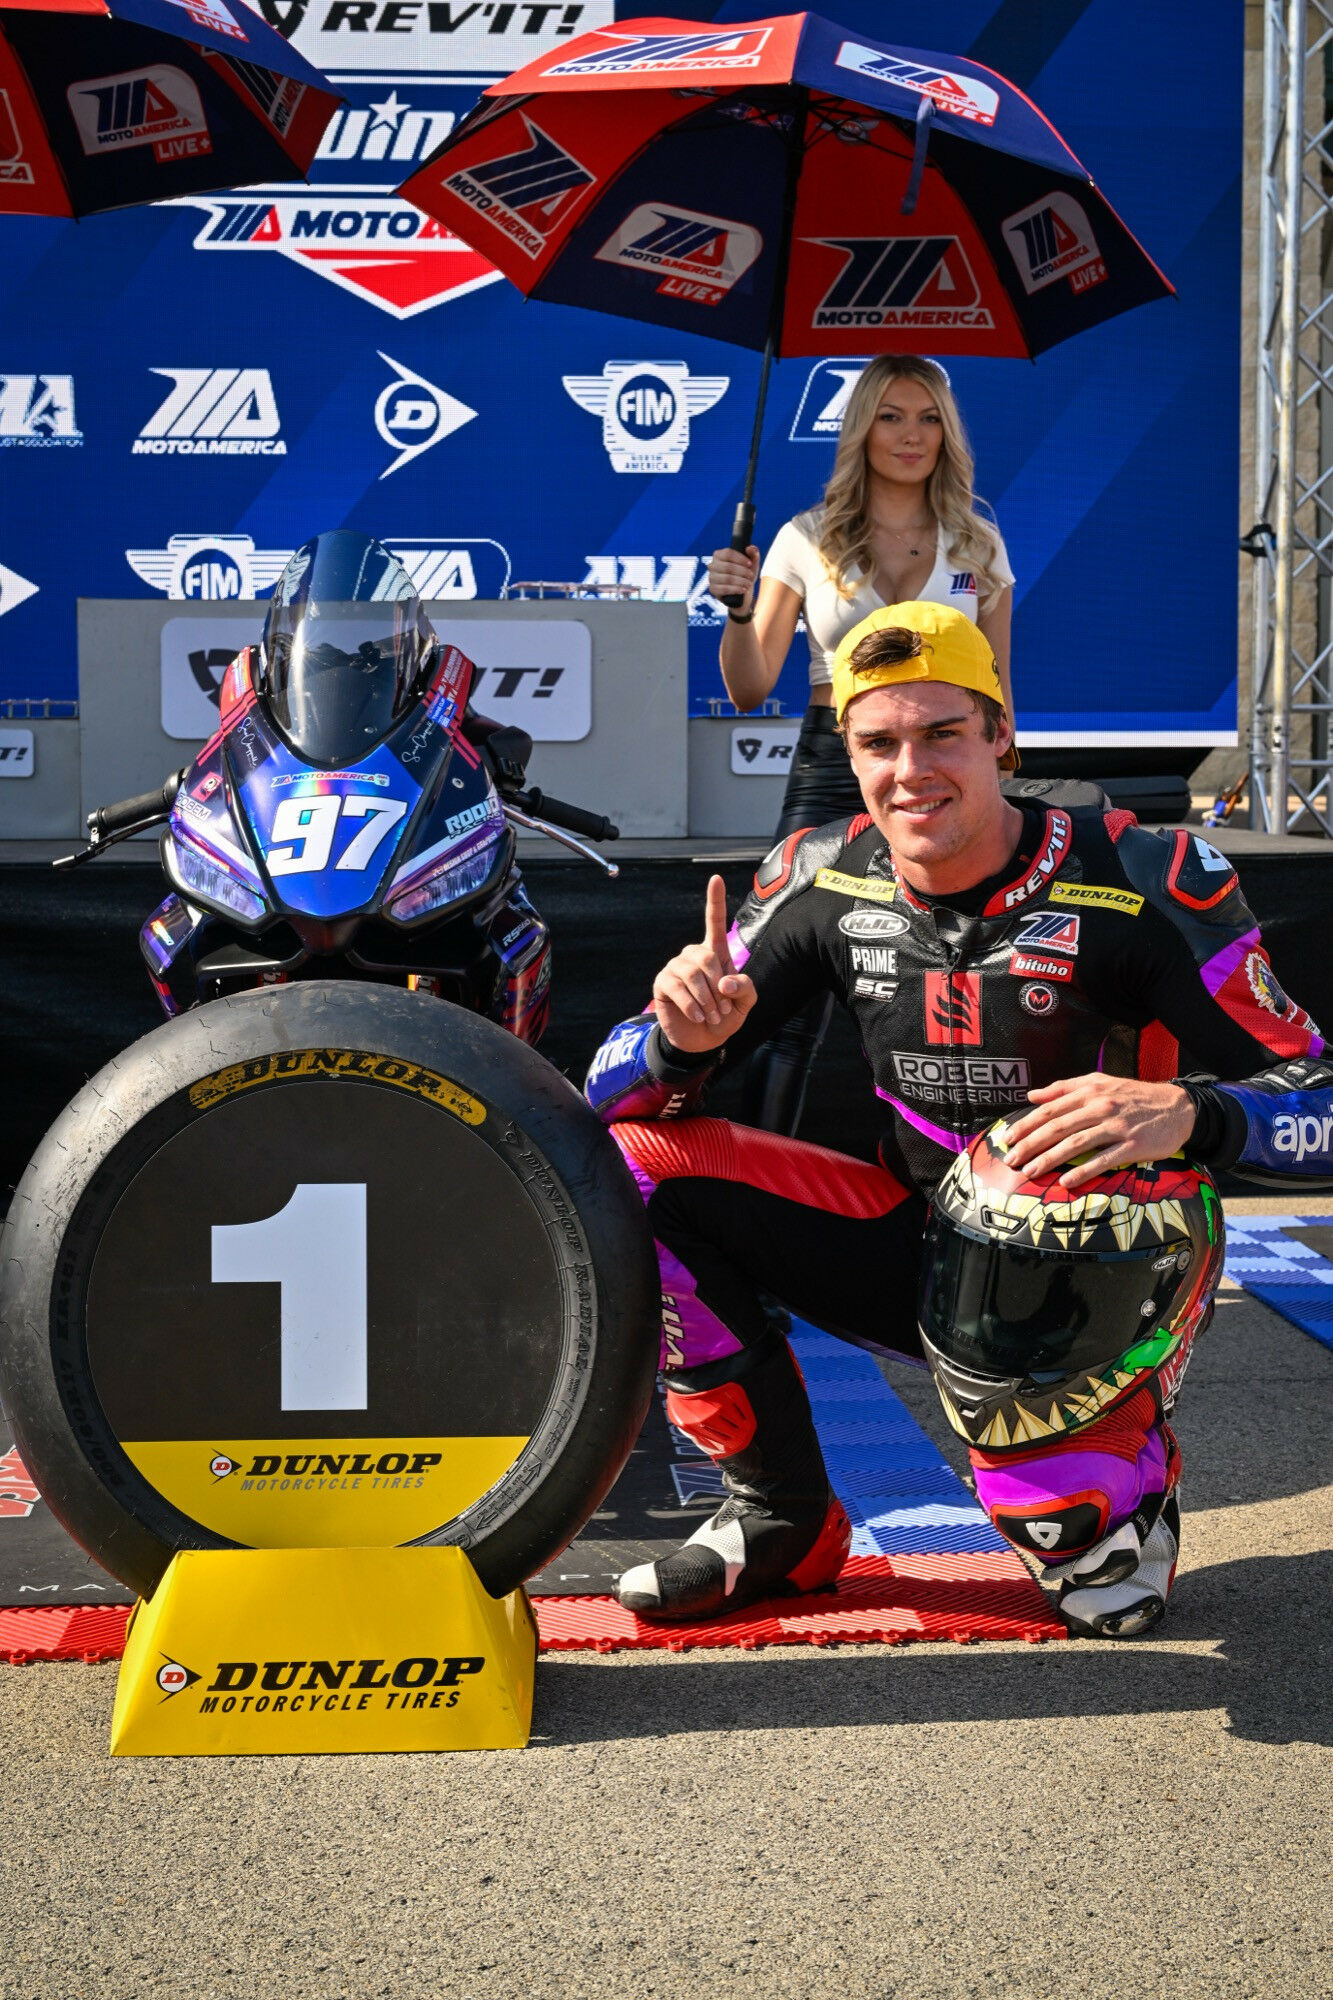 Rocco Landers, after winning Twins Cup Race One at PittRace. Photo by Sara Chappell Photos, courtesy Aprilia Americas.